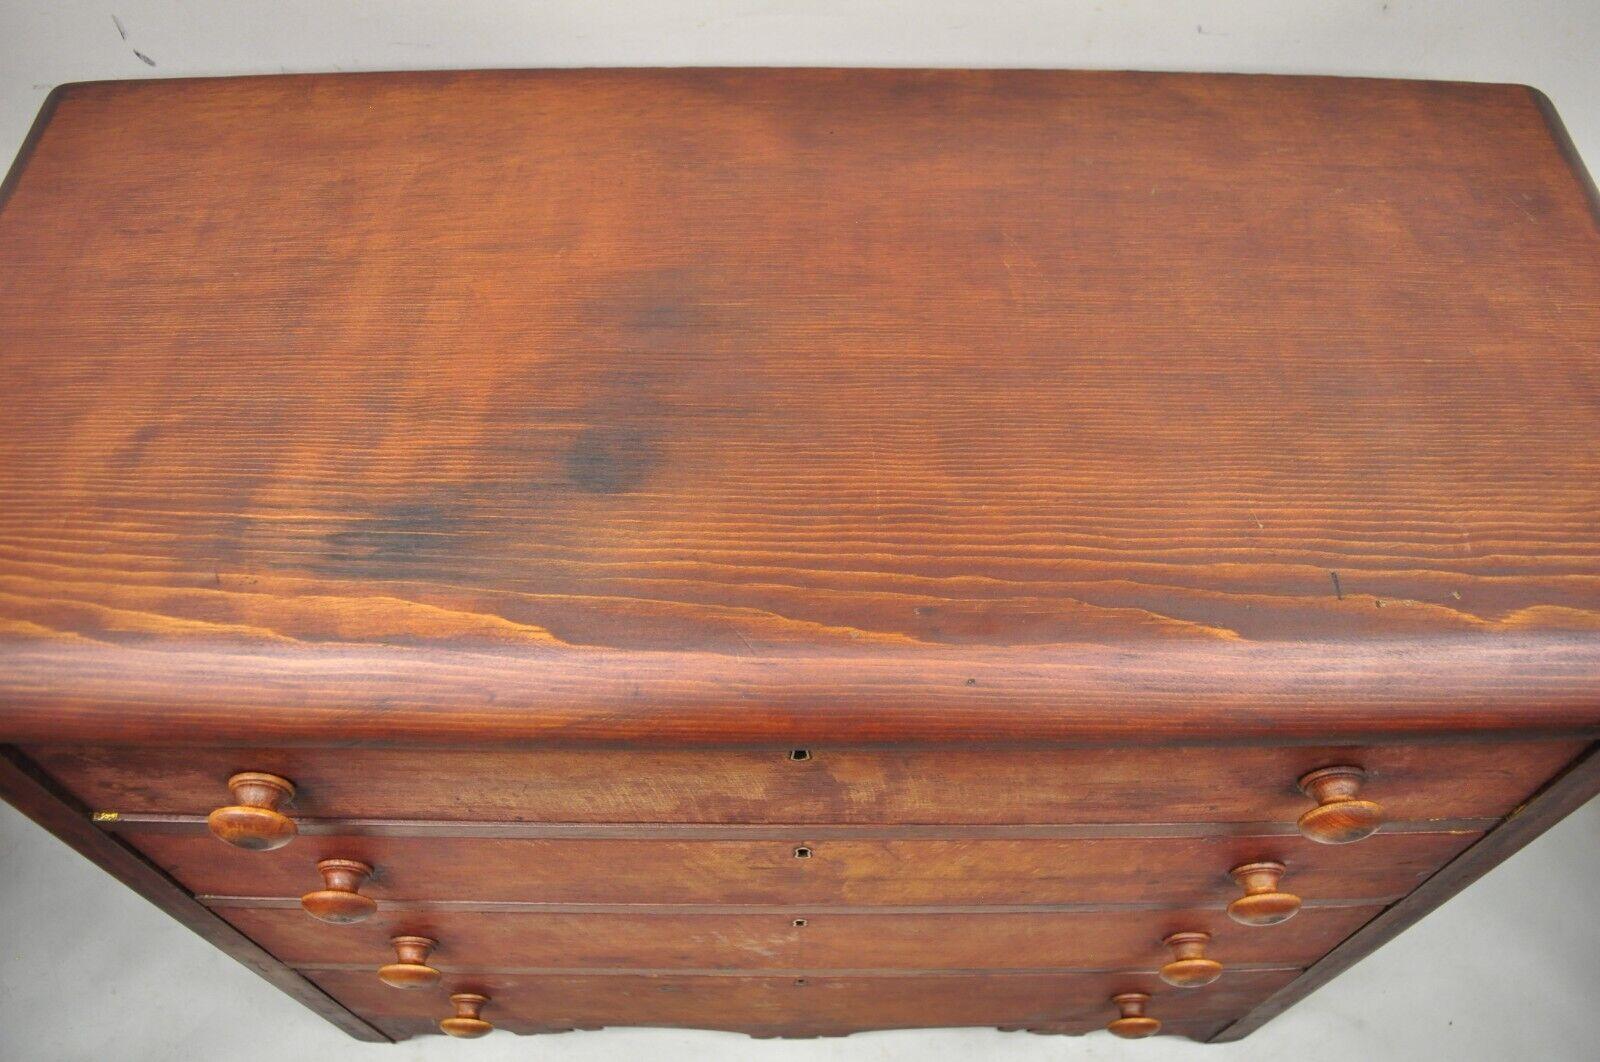 19th Century Antique Carved Victorian Pine Wood 4 Drawer Dresser Chest Red Finish